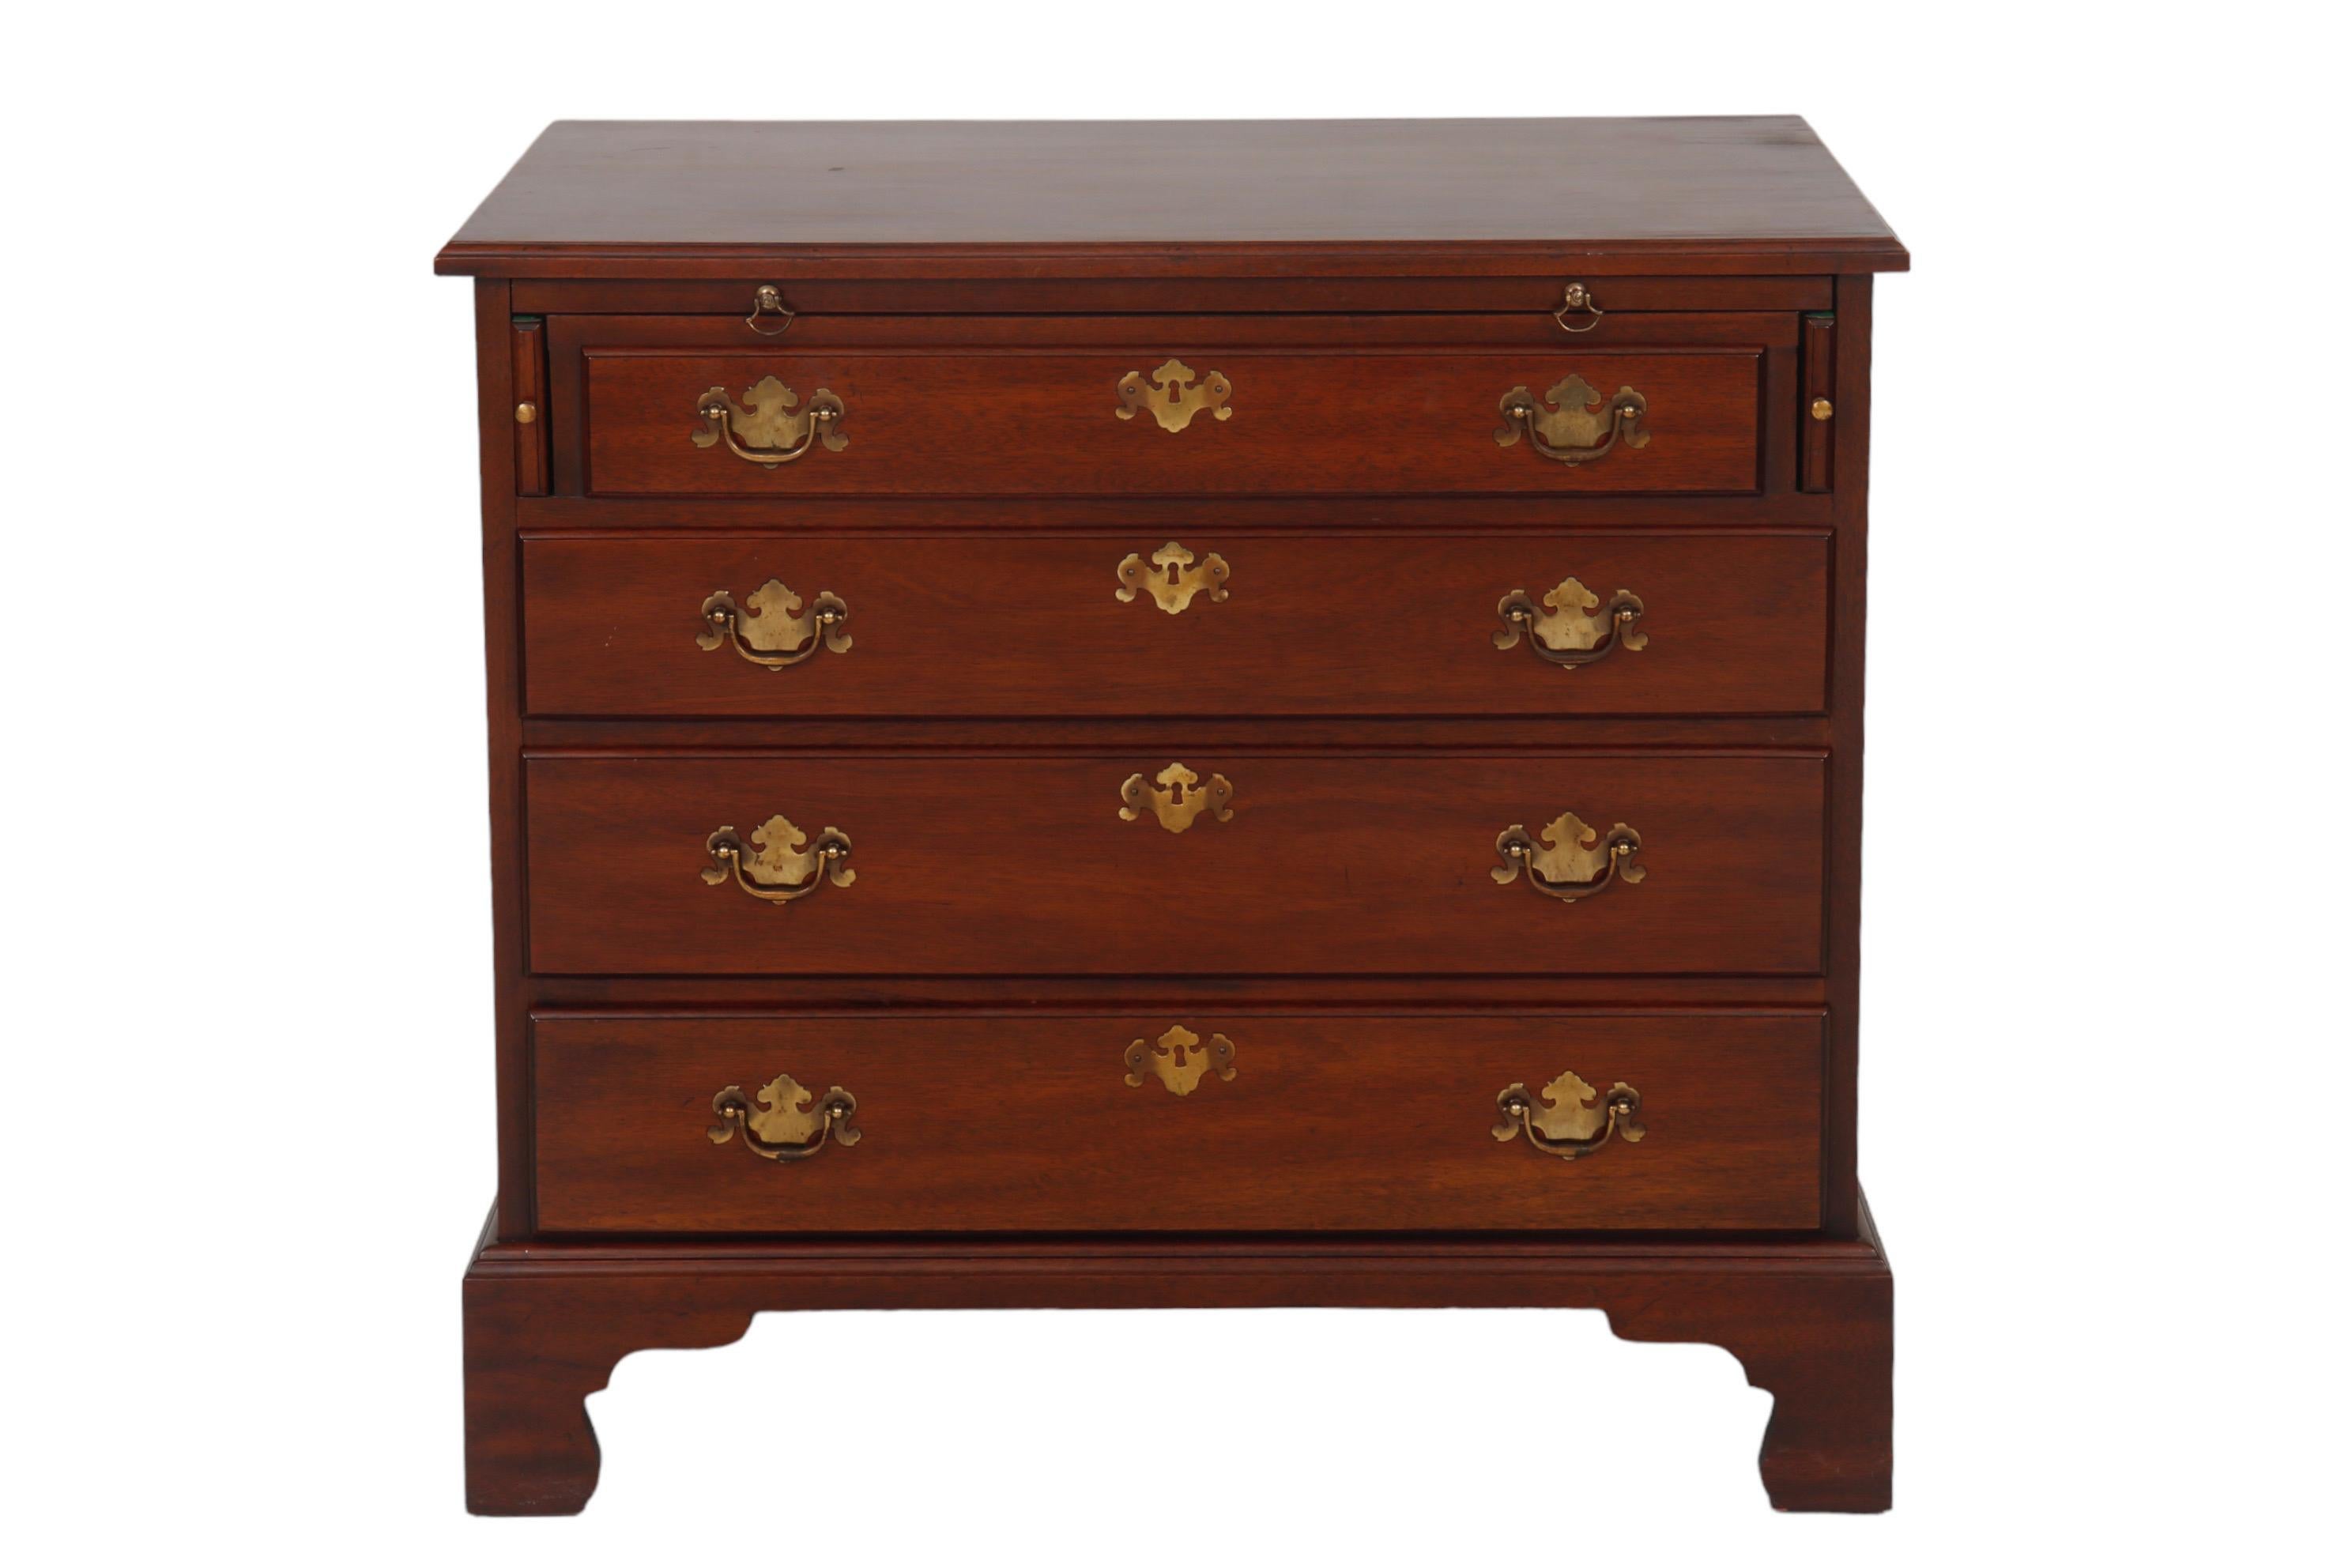 A Chippendale style bachelor chest in mahogany, made by Henkel-Harris of Winchester, Virginia. A top pull-out shelf rests on slides at each side with knob handles. Four dovetailed drawers open with brass bail handles on bat shaped back plates.